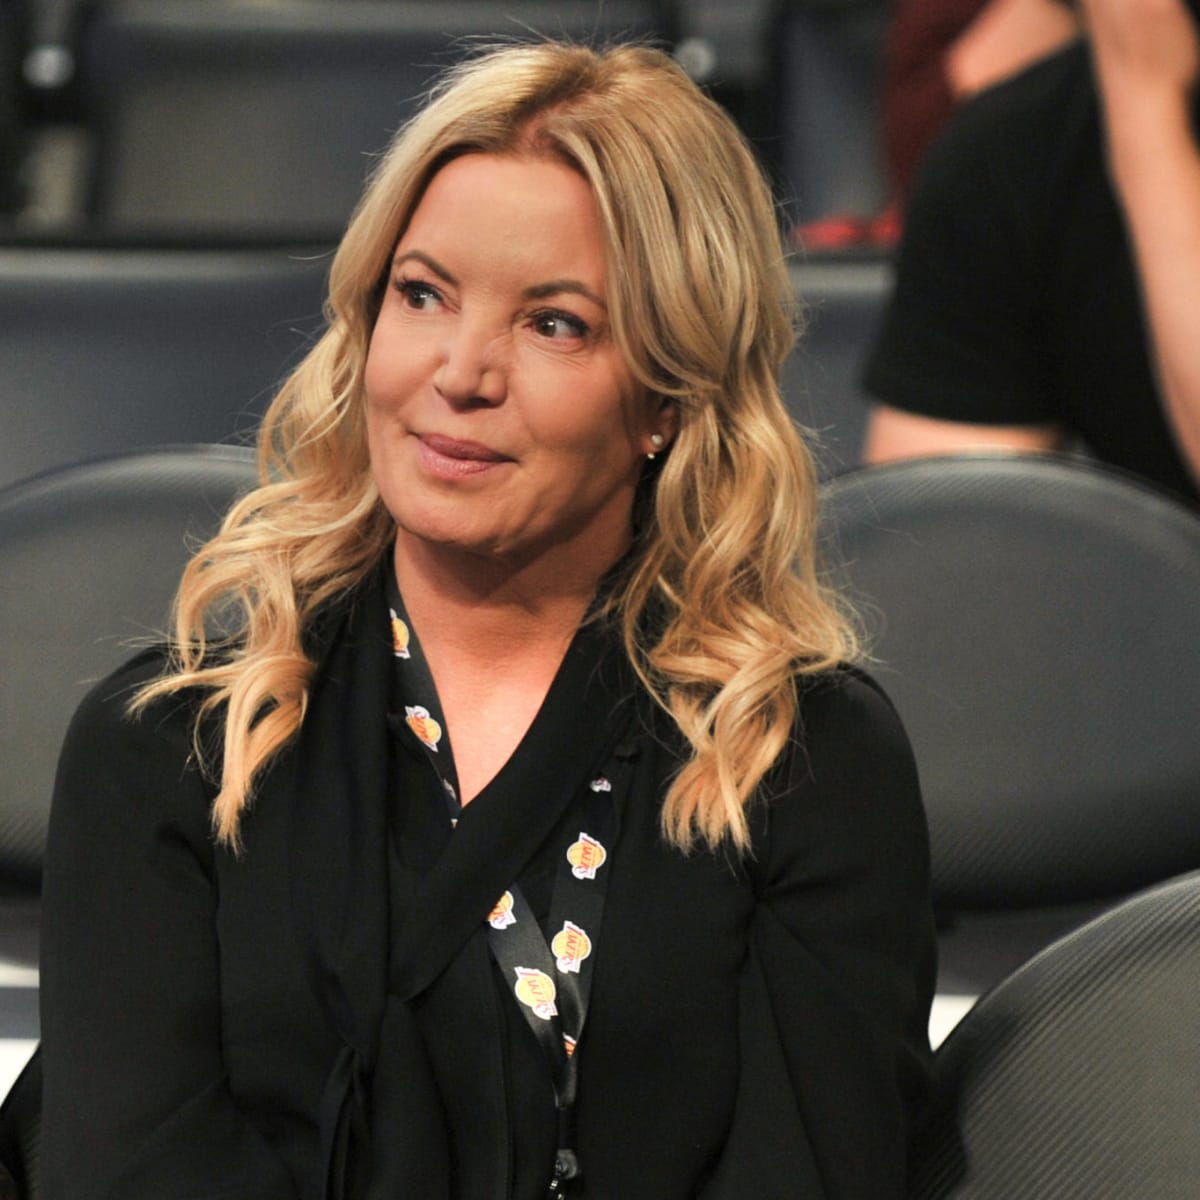 Jerry West Rips Jeanie Buss' Top 5 Lakers Rankings: '1 of the Most